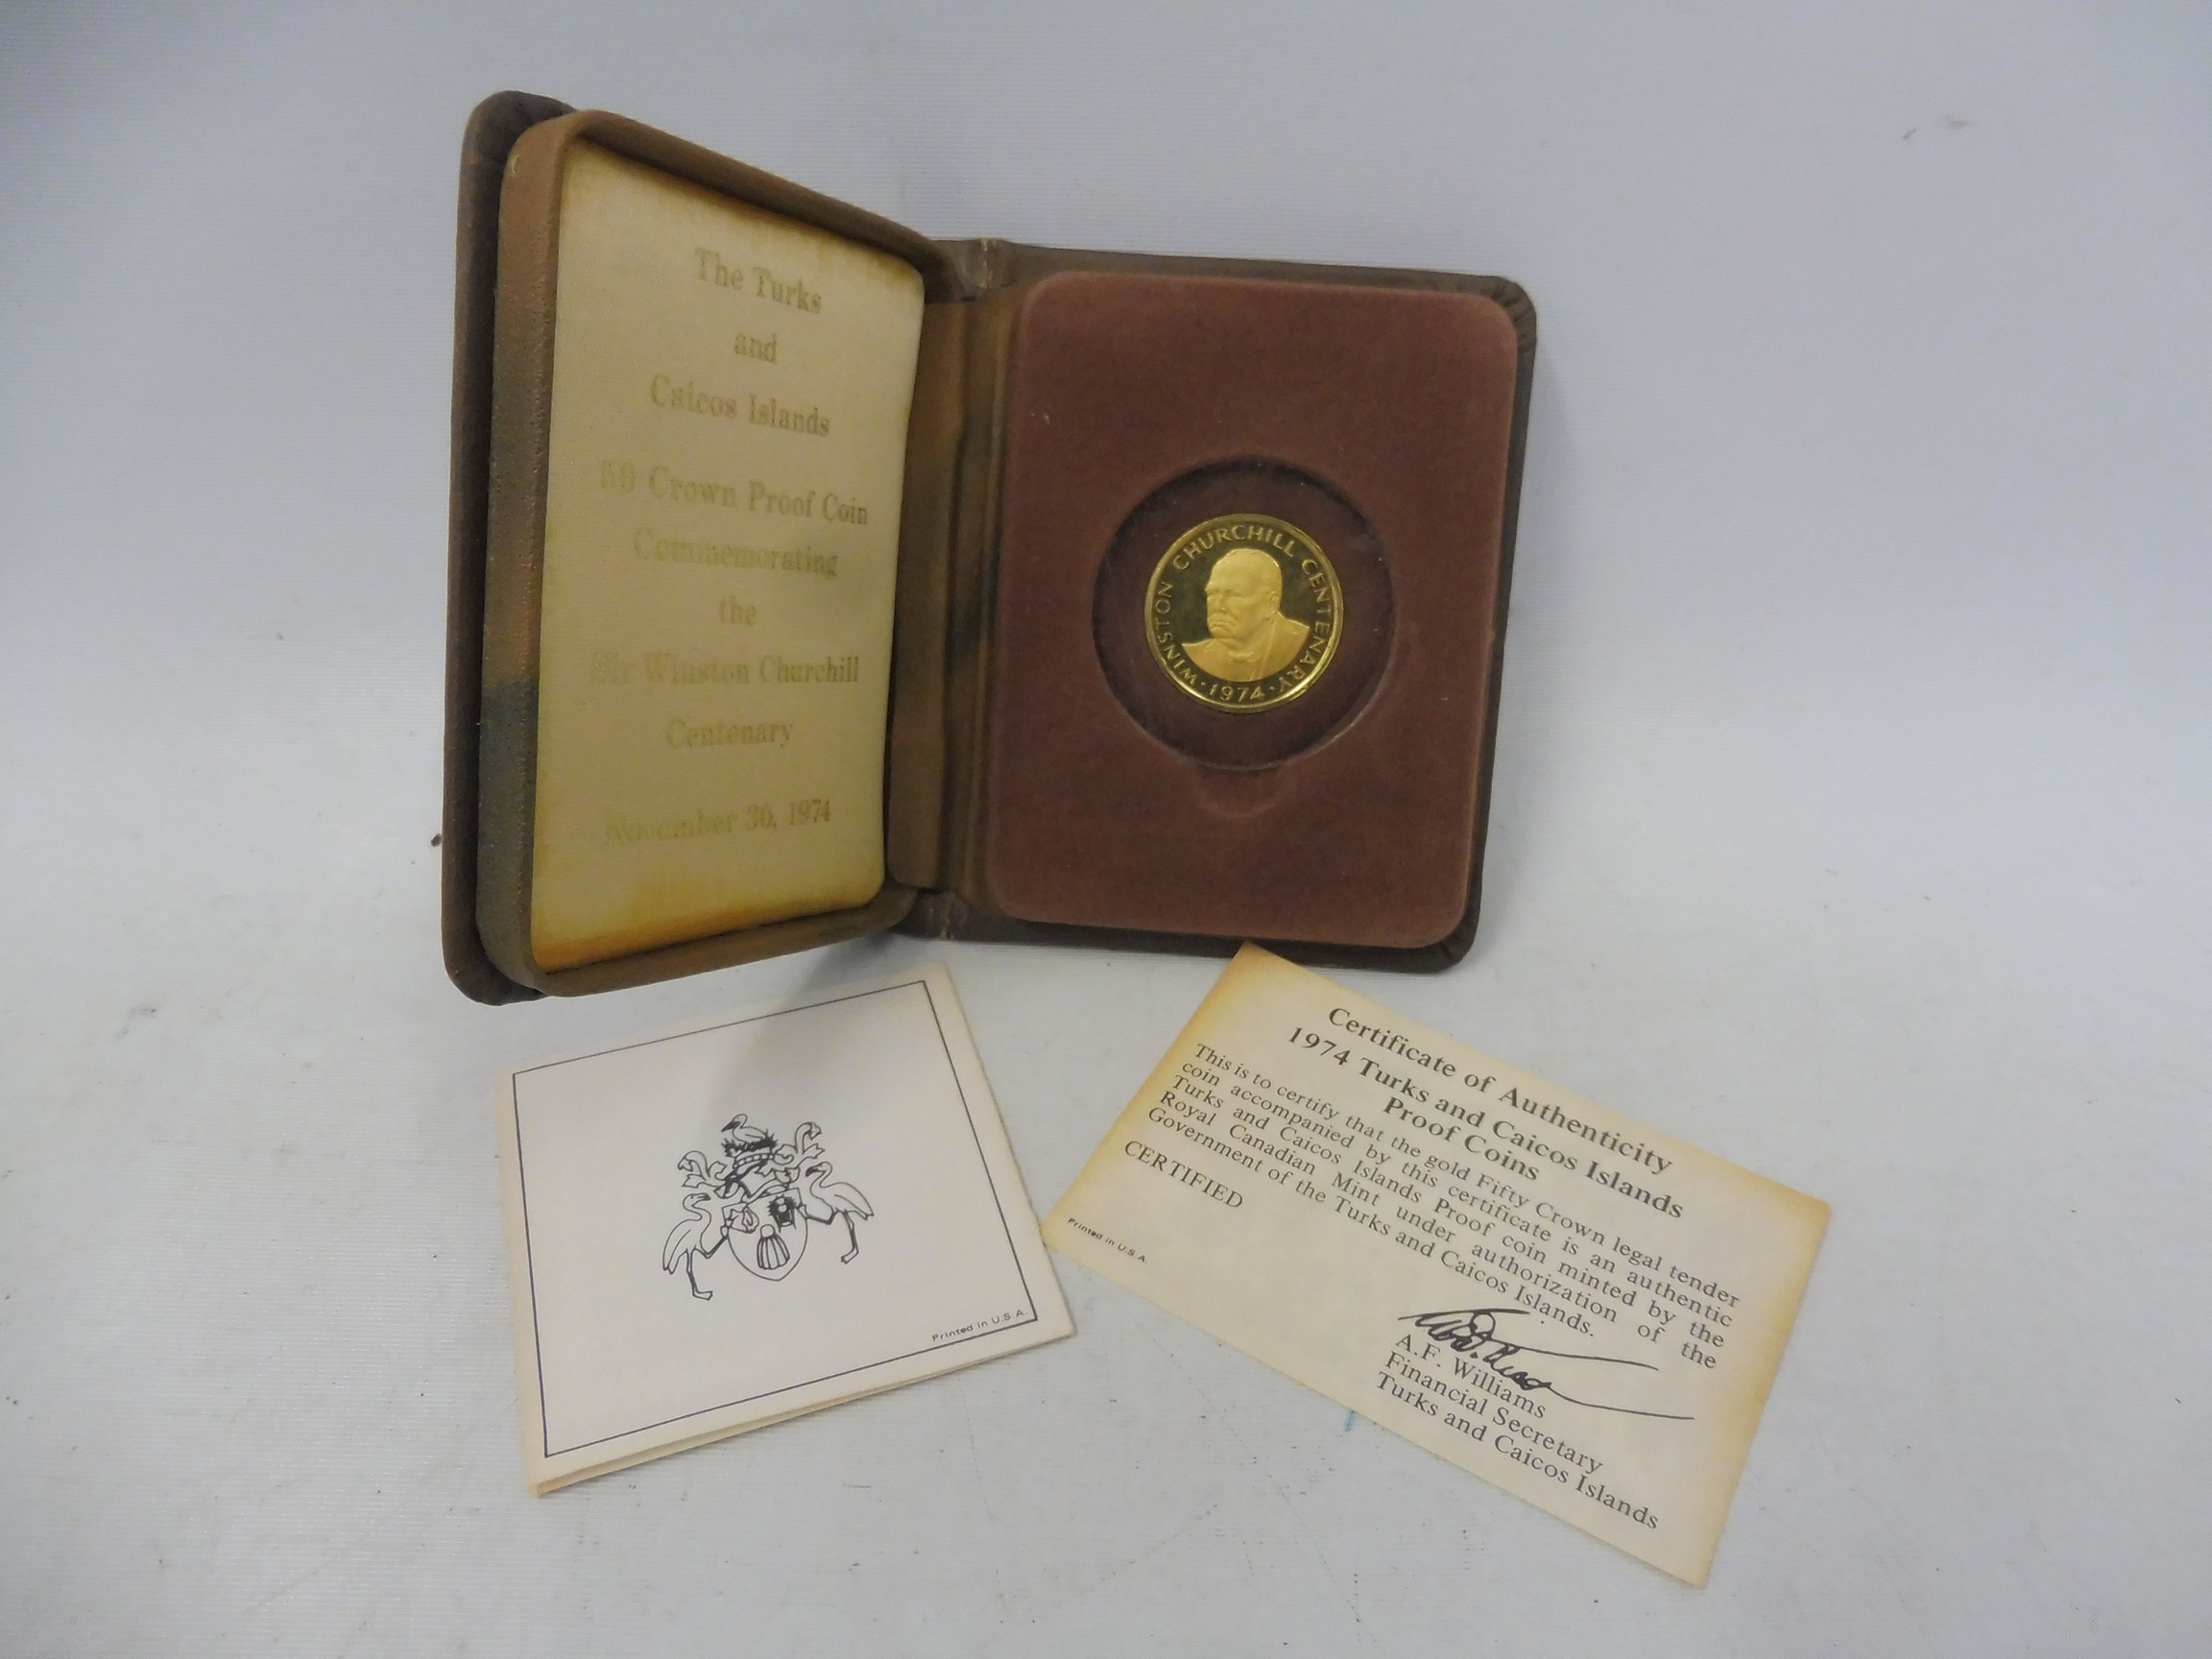 A cased 1974 Turks and Caicos Islands Churchill gold fifty crown proof coin, with certificate and